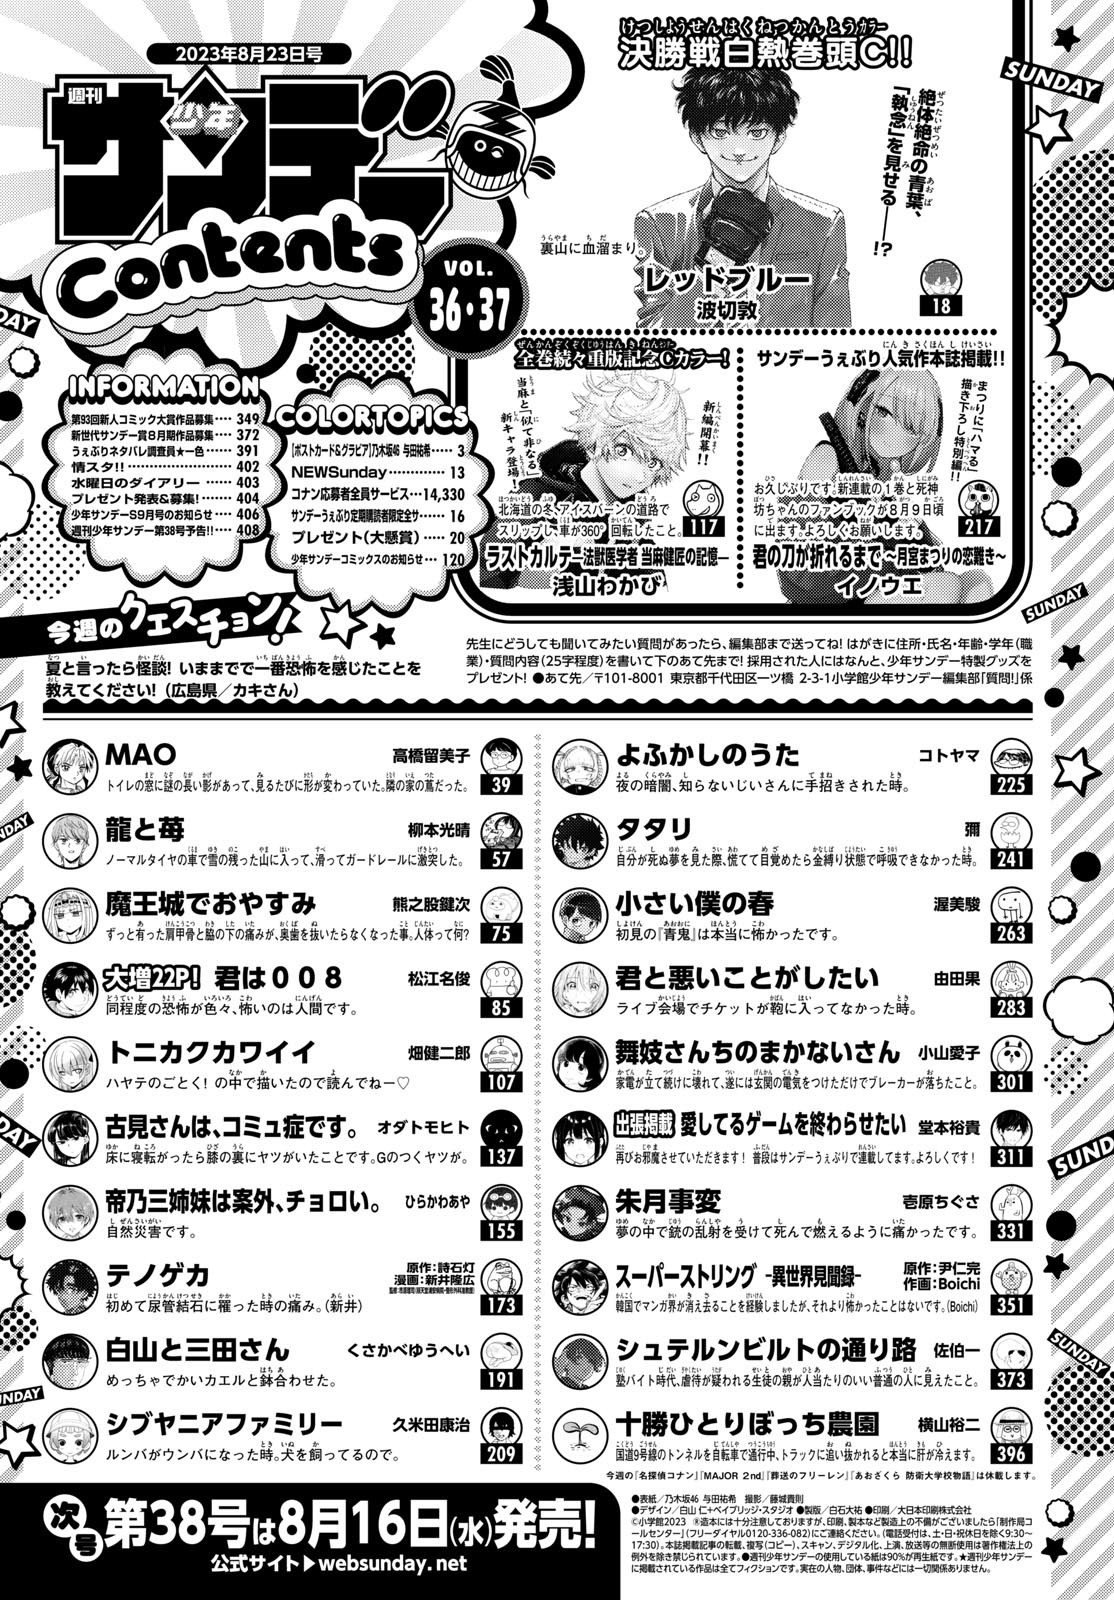 Weekly Shōnen Sunday - 週刊少年サンデー - Chapter 2023-36-37 - Page 2